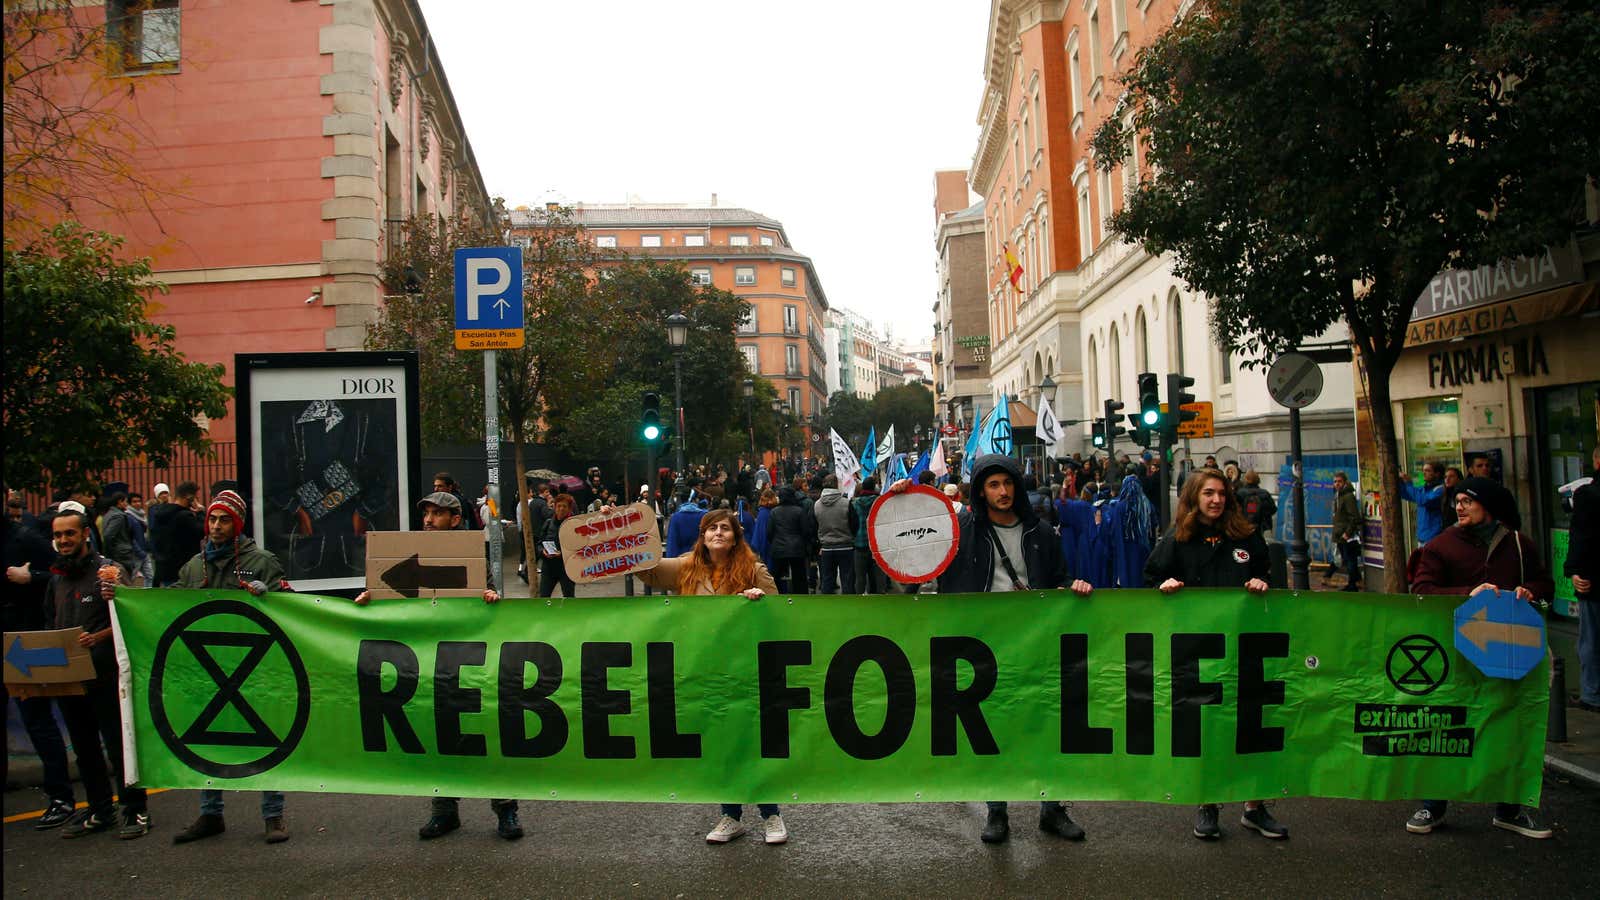 Another self-organized Extinction Rebellion protest for the environment.